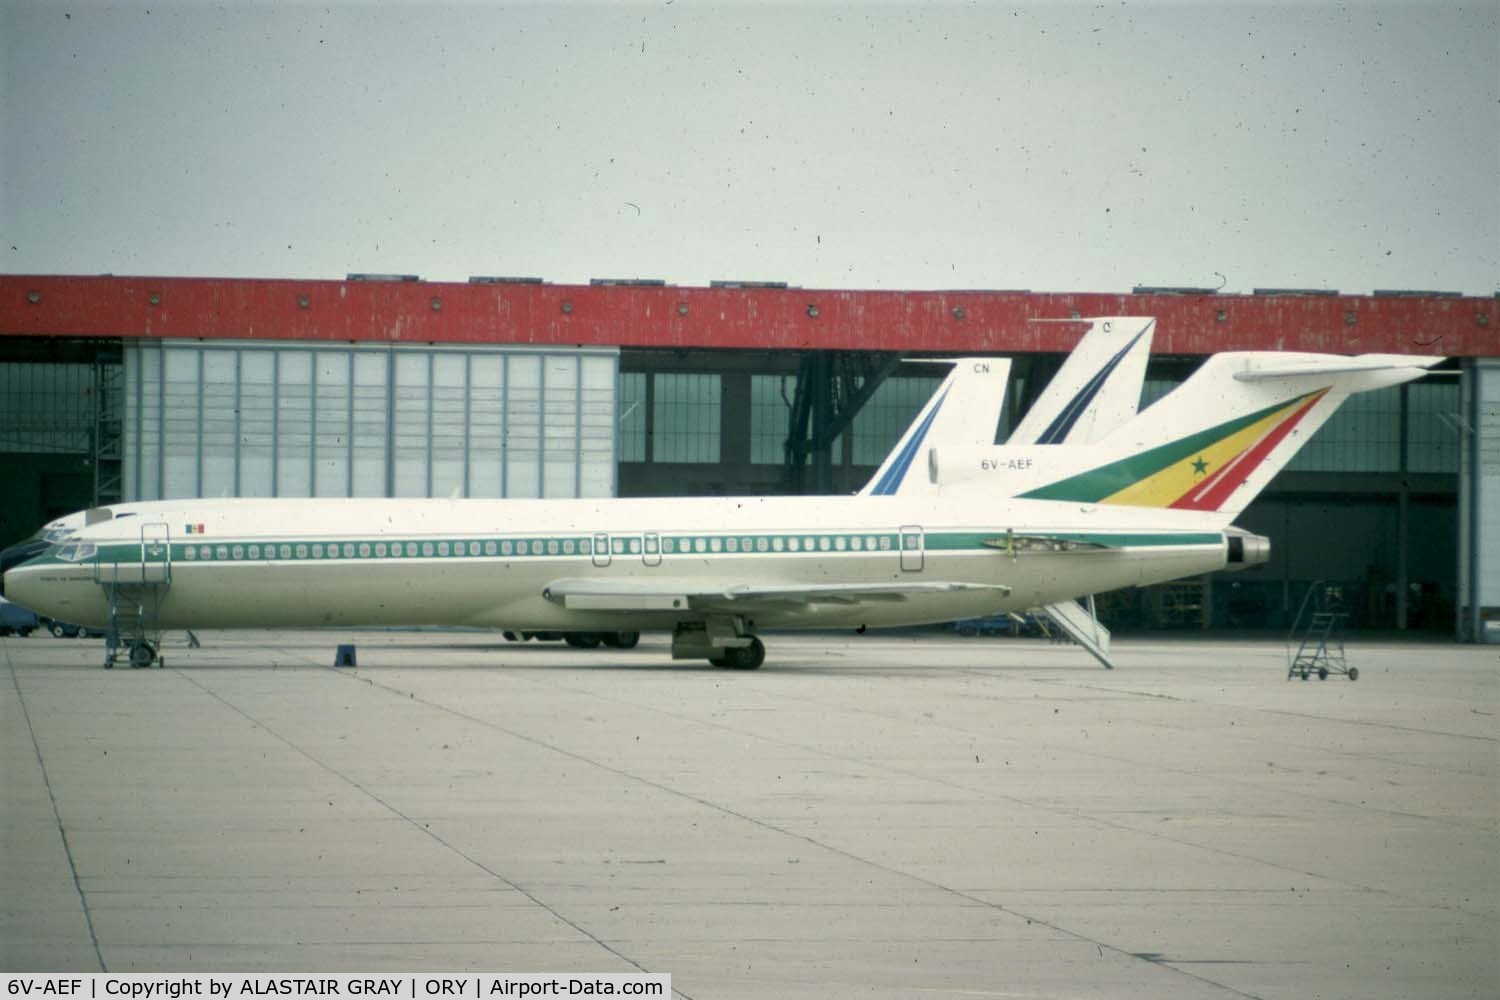 6V-AEF, 1975 Boeing 727-2M1 C/N 21091, undergoing maintenance with Air France at Orly